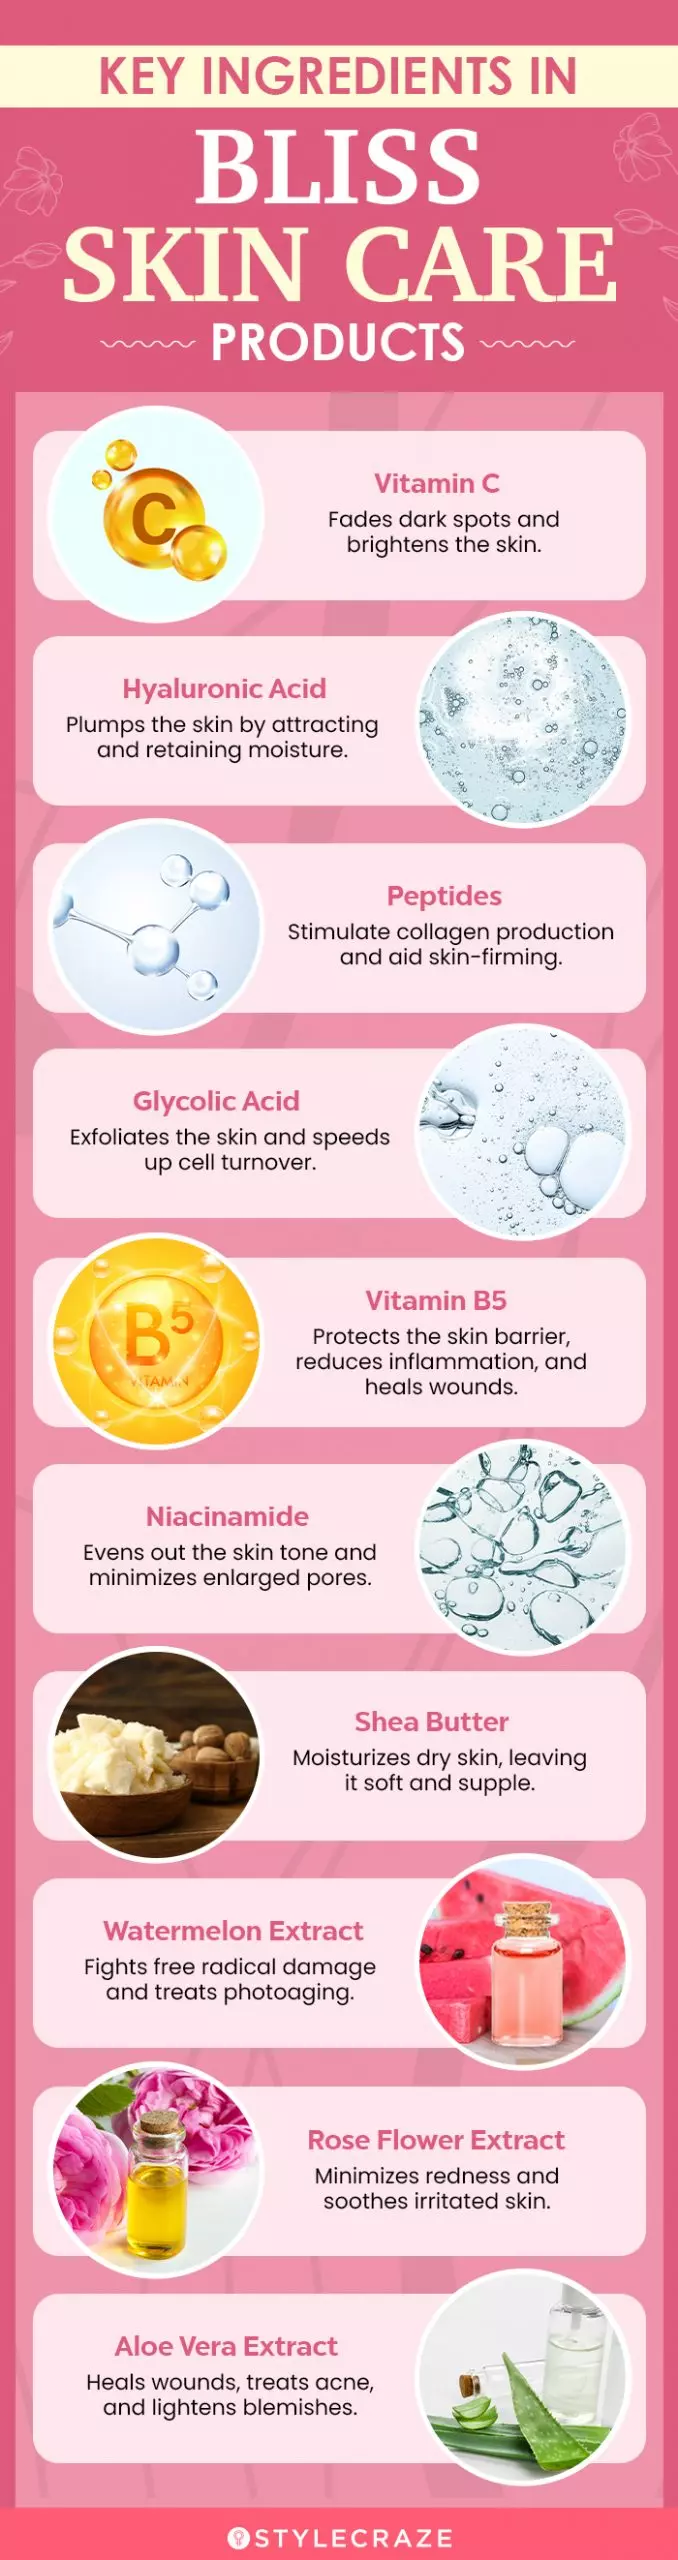 Key Ingredients In Bliss Skin Care Products (infographic)